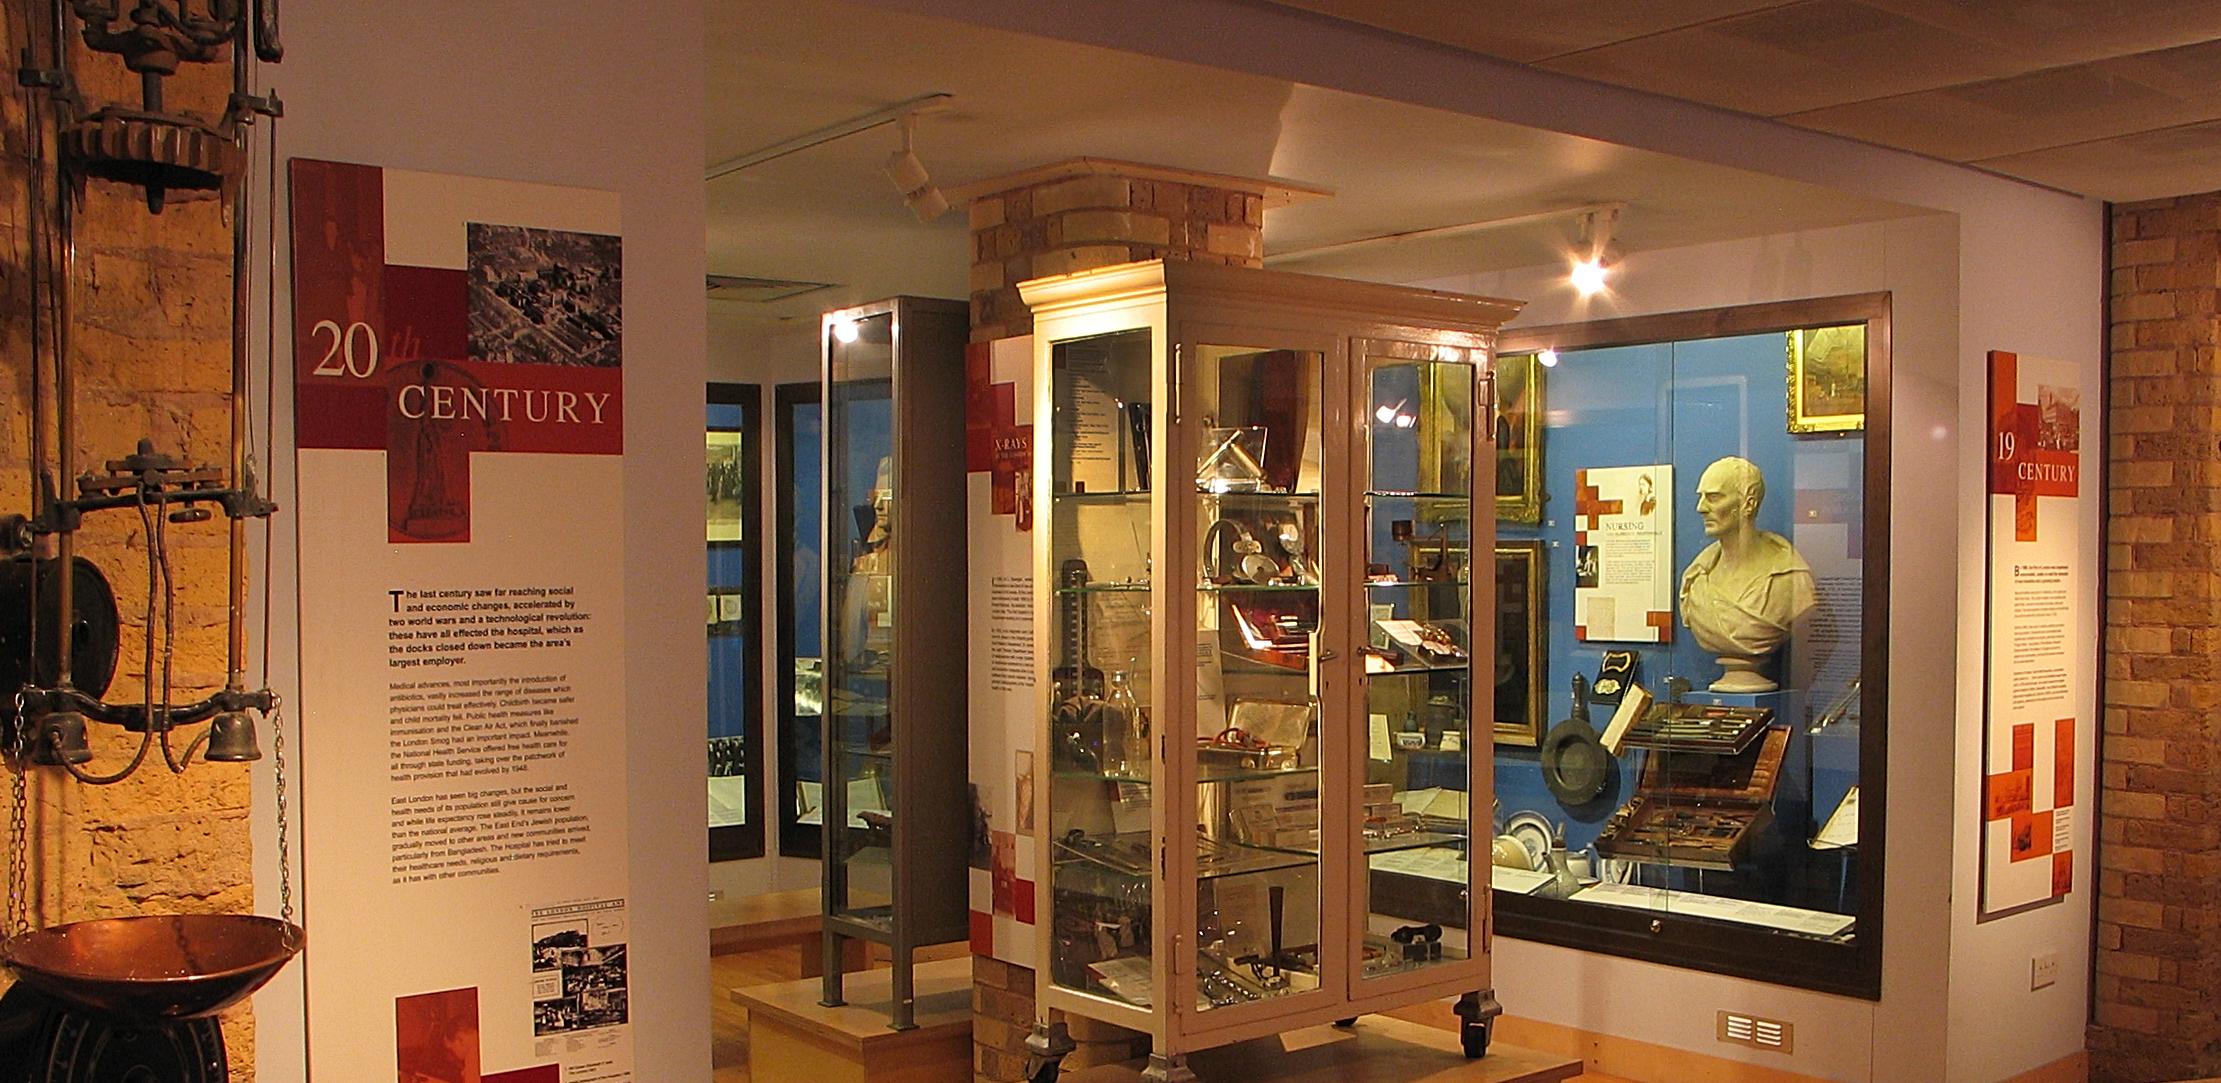 View of the Royal London Hospital Museum